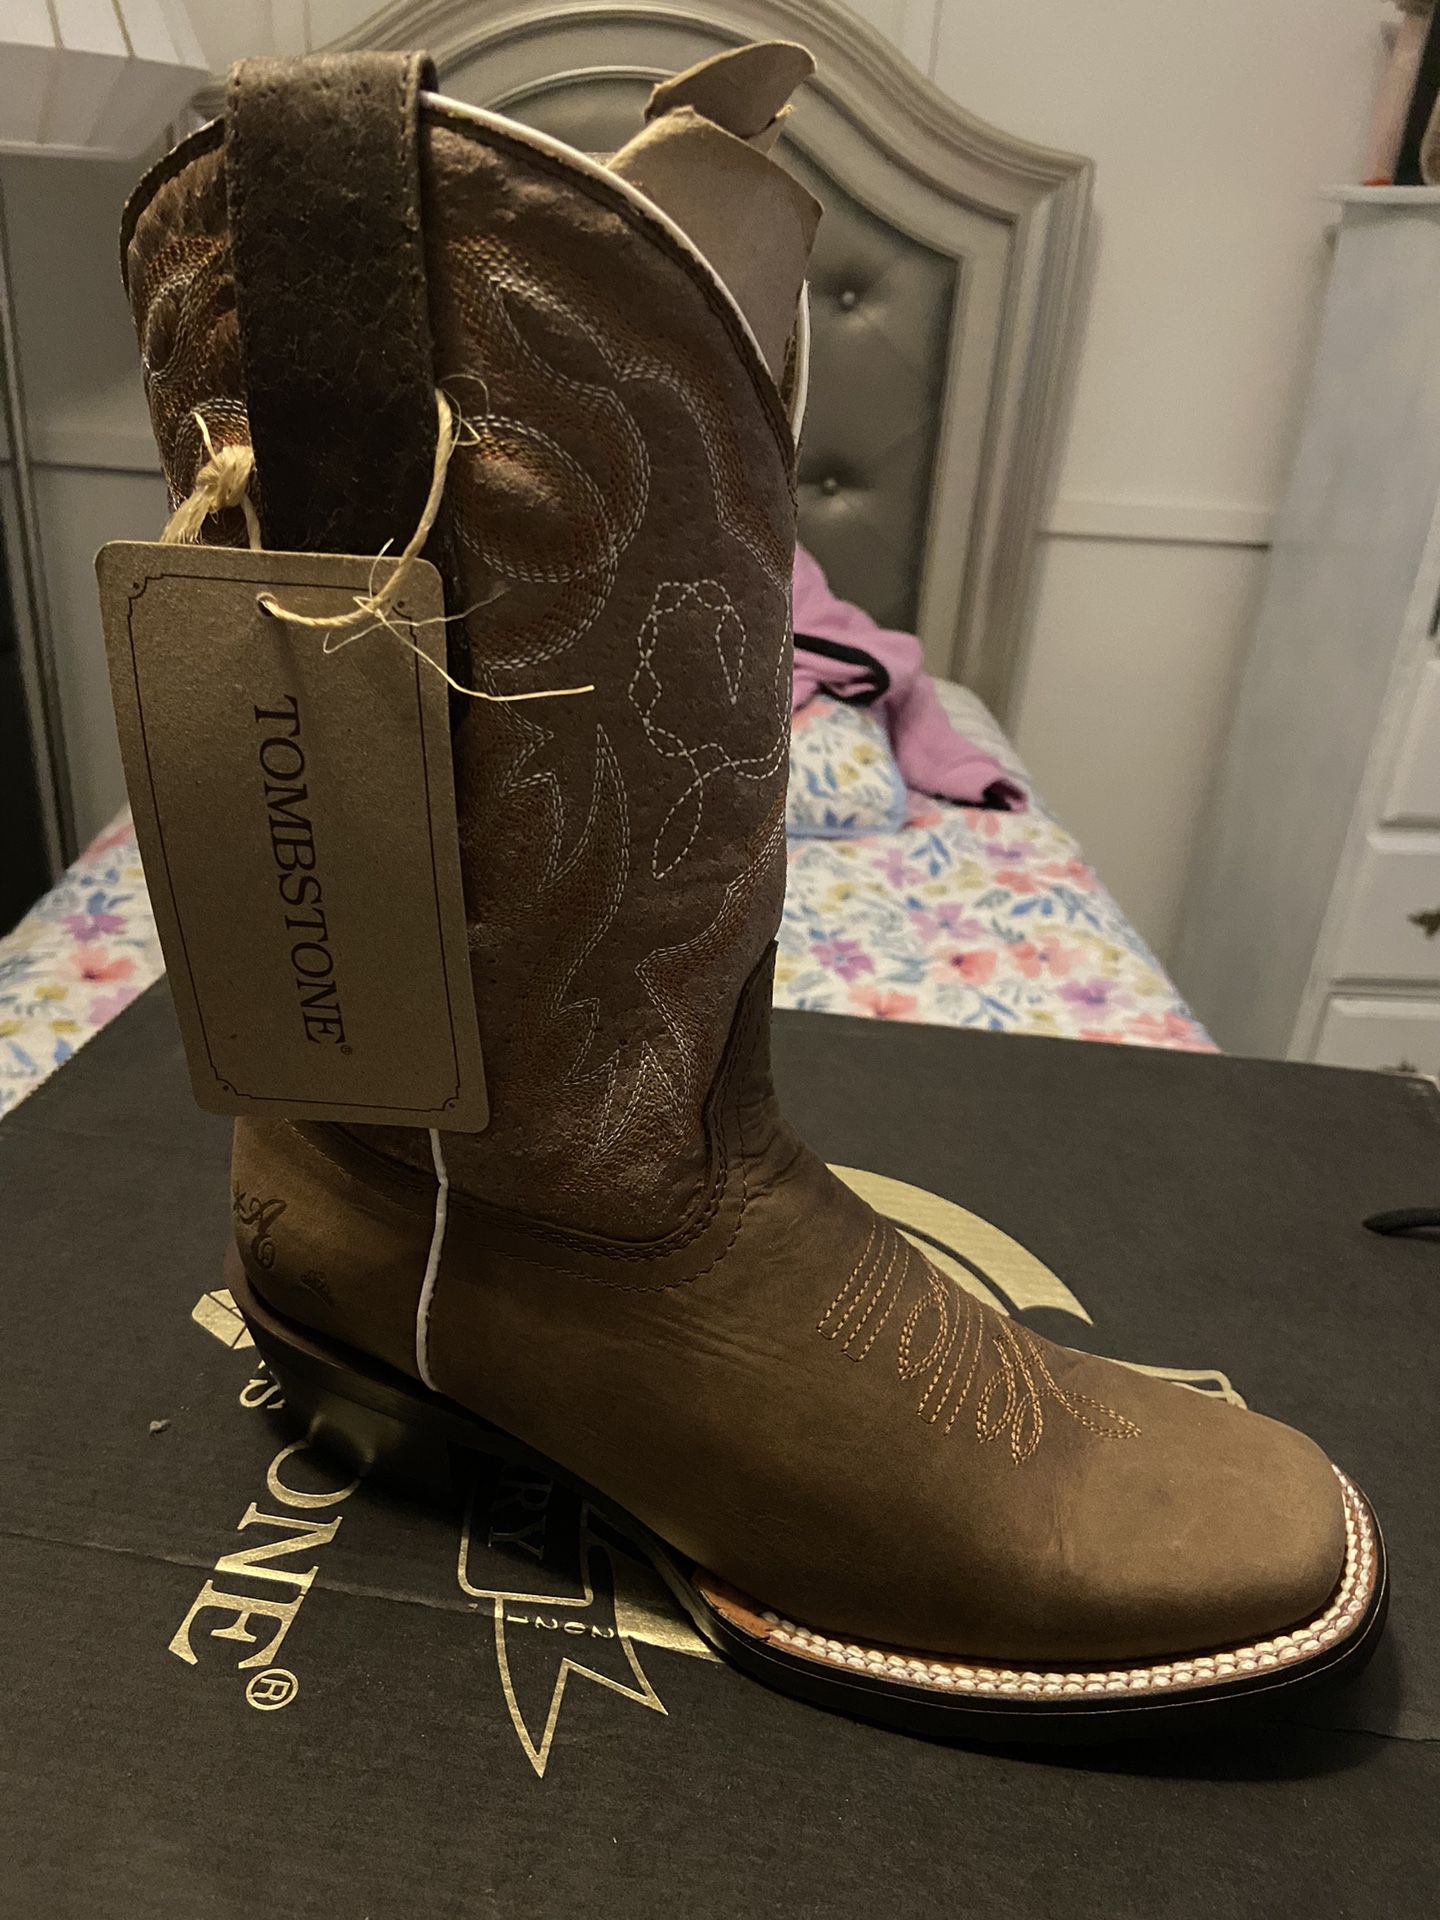 Tombstone Boots For Women 